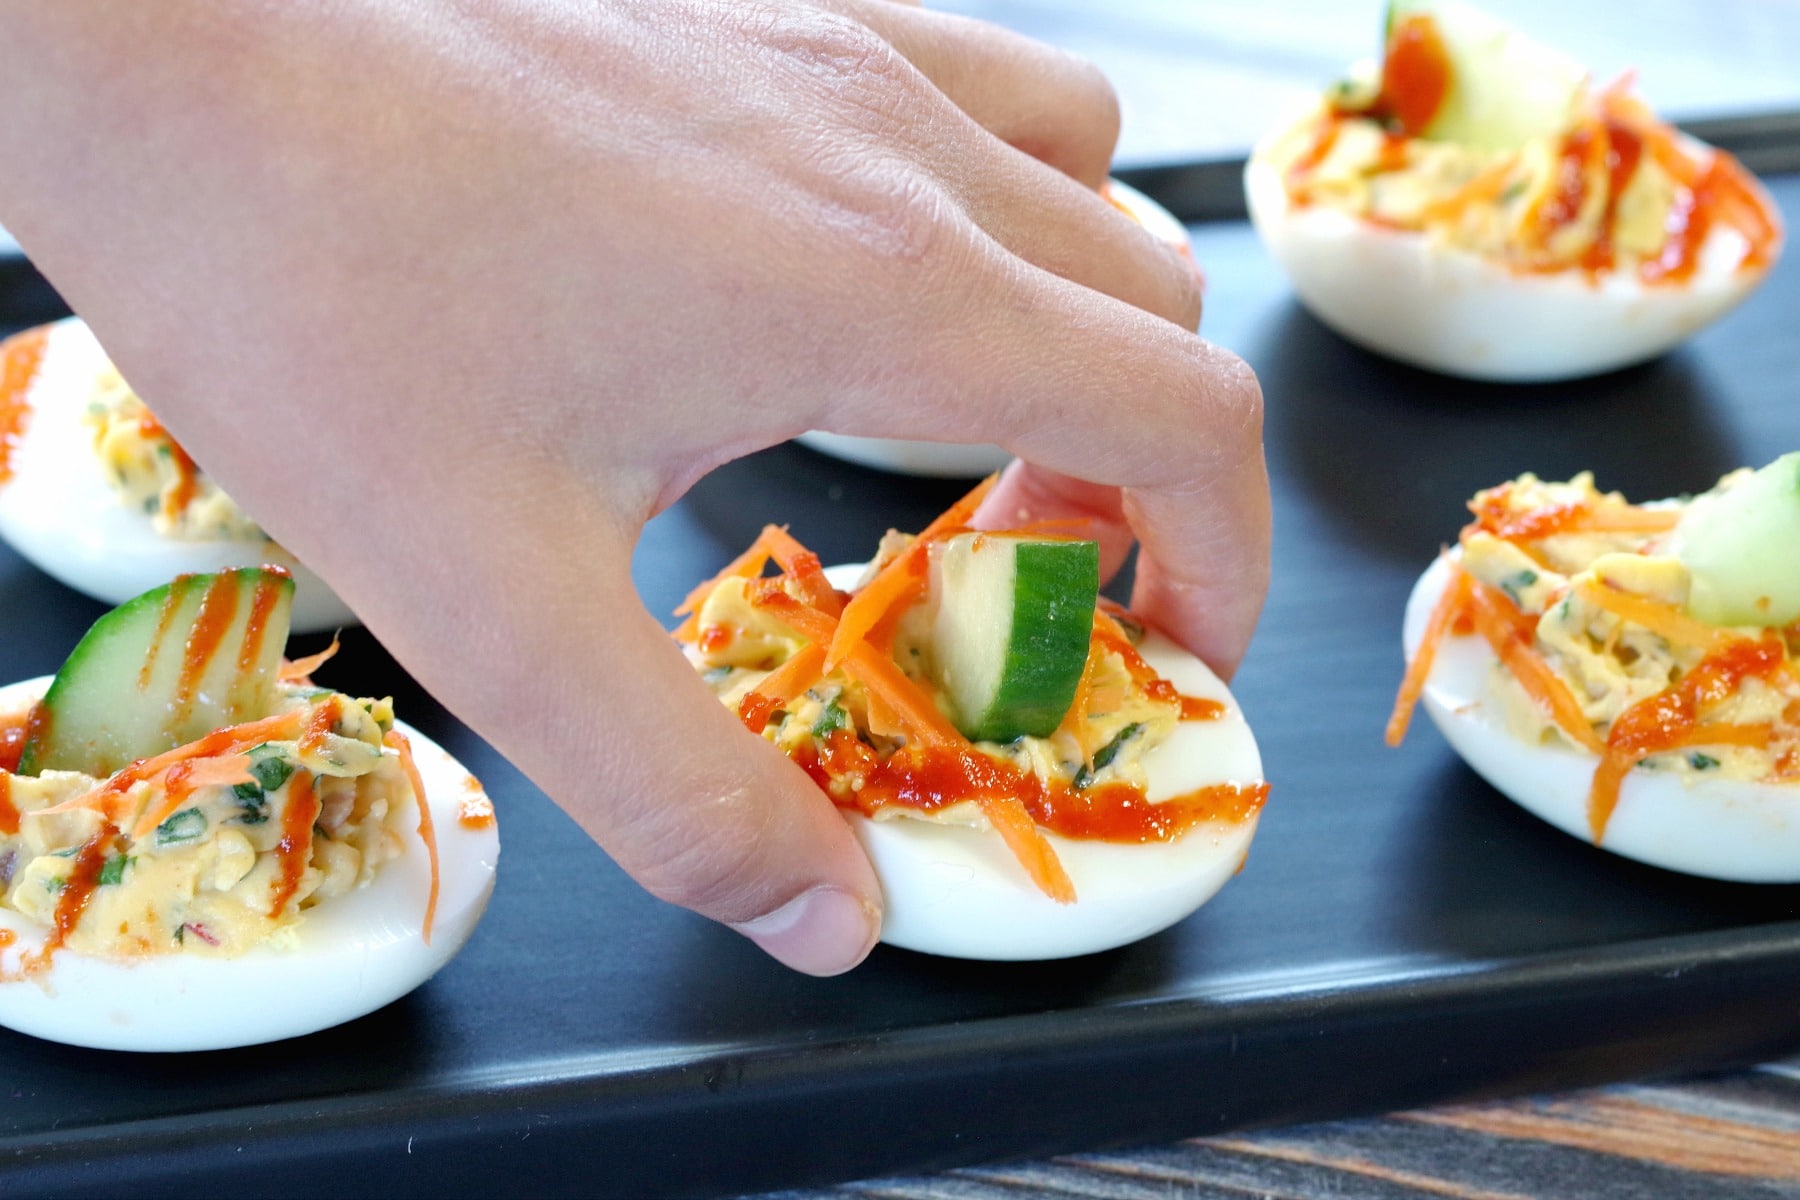 banh mi devilled egg being grabbed off black tray with child's hand